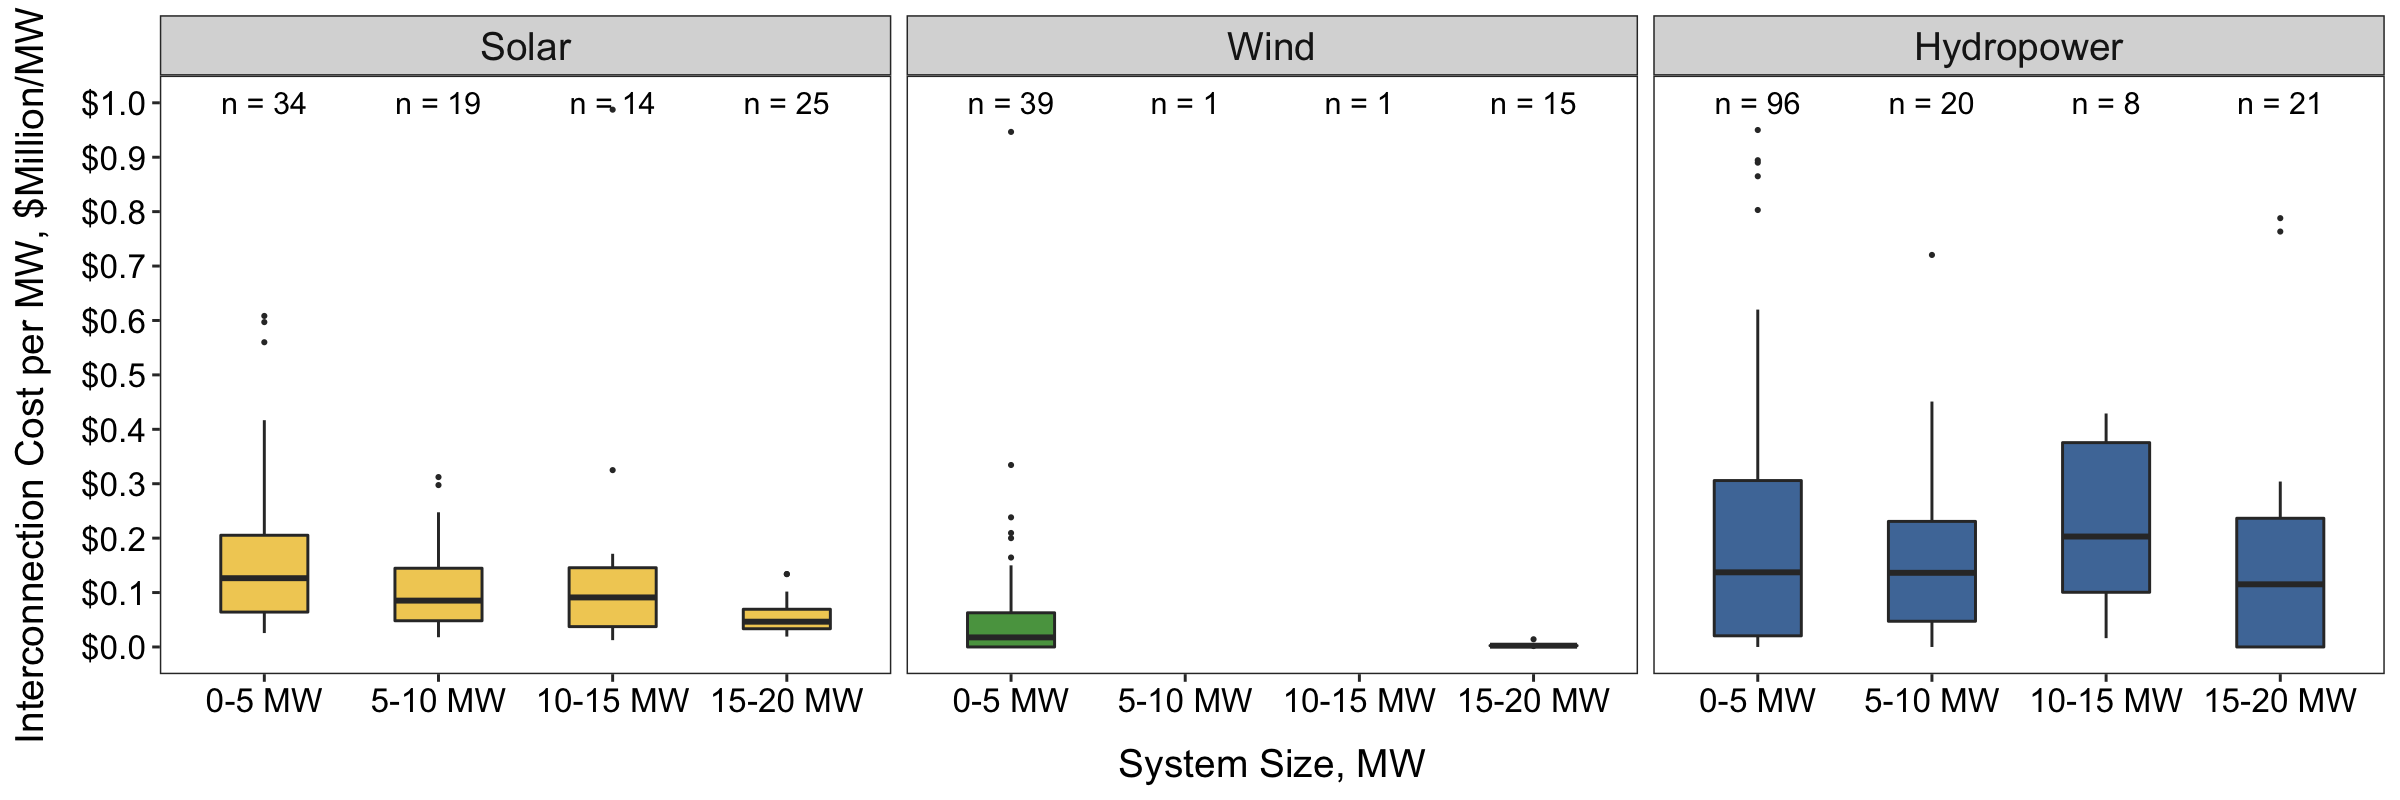 Interconnection costs for small hydropower projects are higher than those of solar and distributed wind, which can hamper developments in this sector. (Figure by Mark Severy | Pacific Northwest National Laboratory)